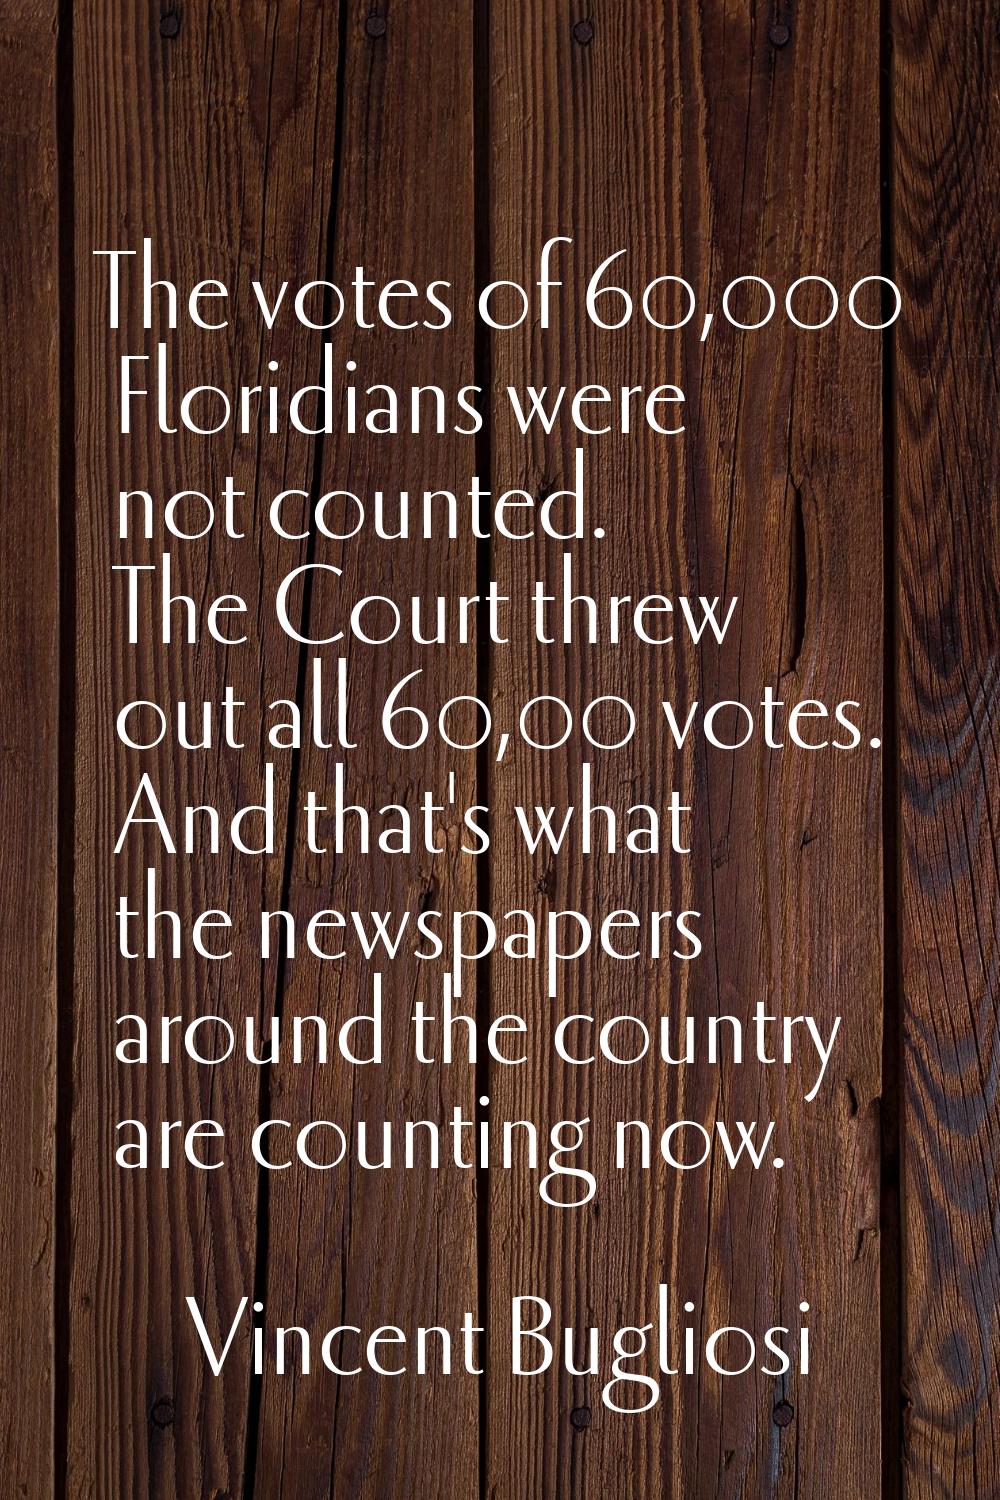 The votes of 60,000 Floridians were not counted. The Court threw out all 60,00 votes. And that's wh